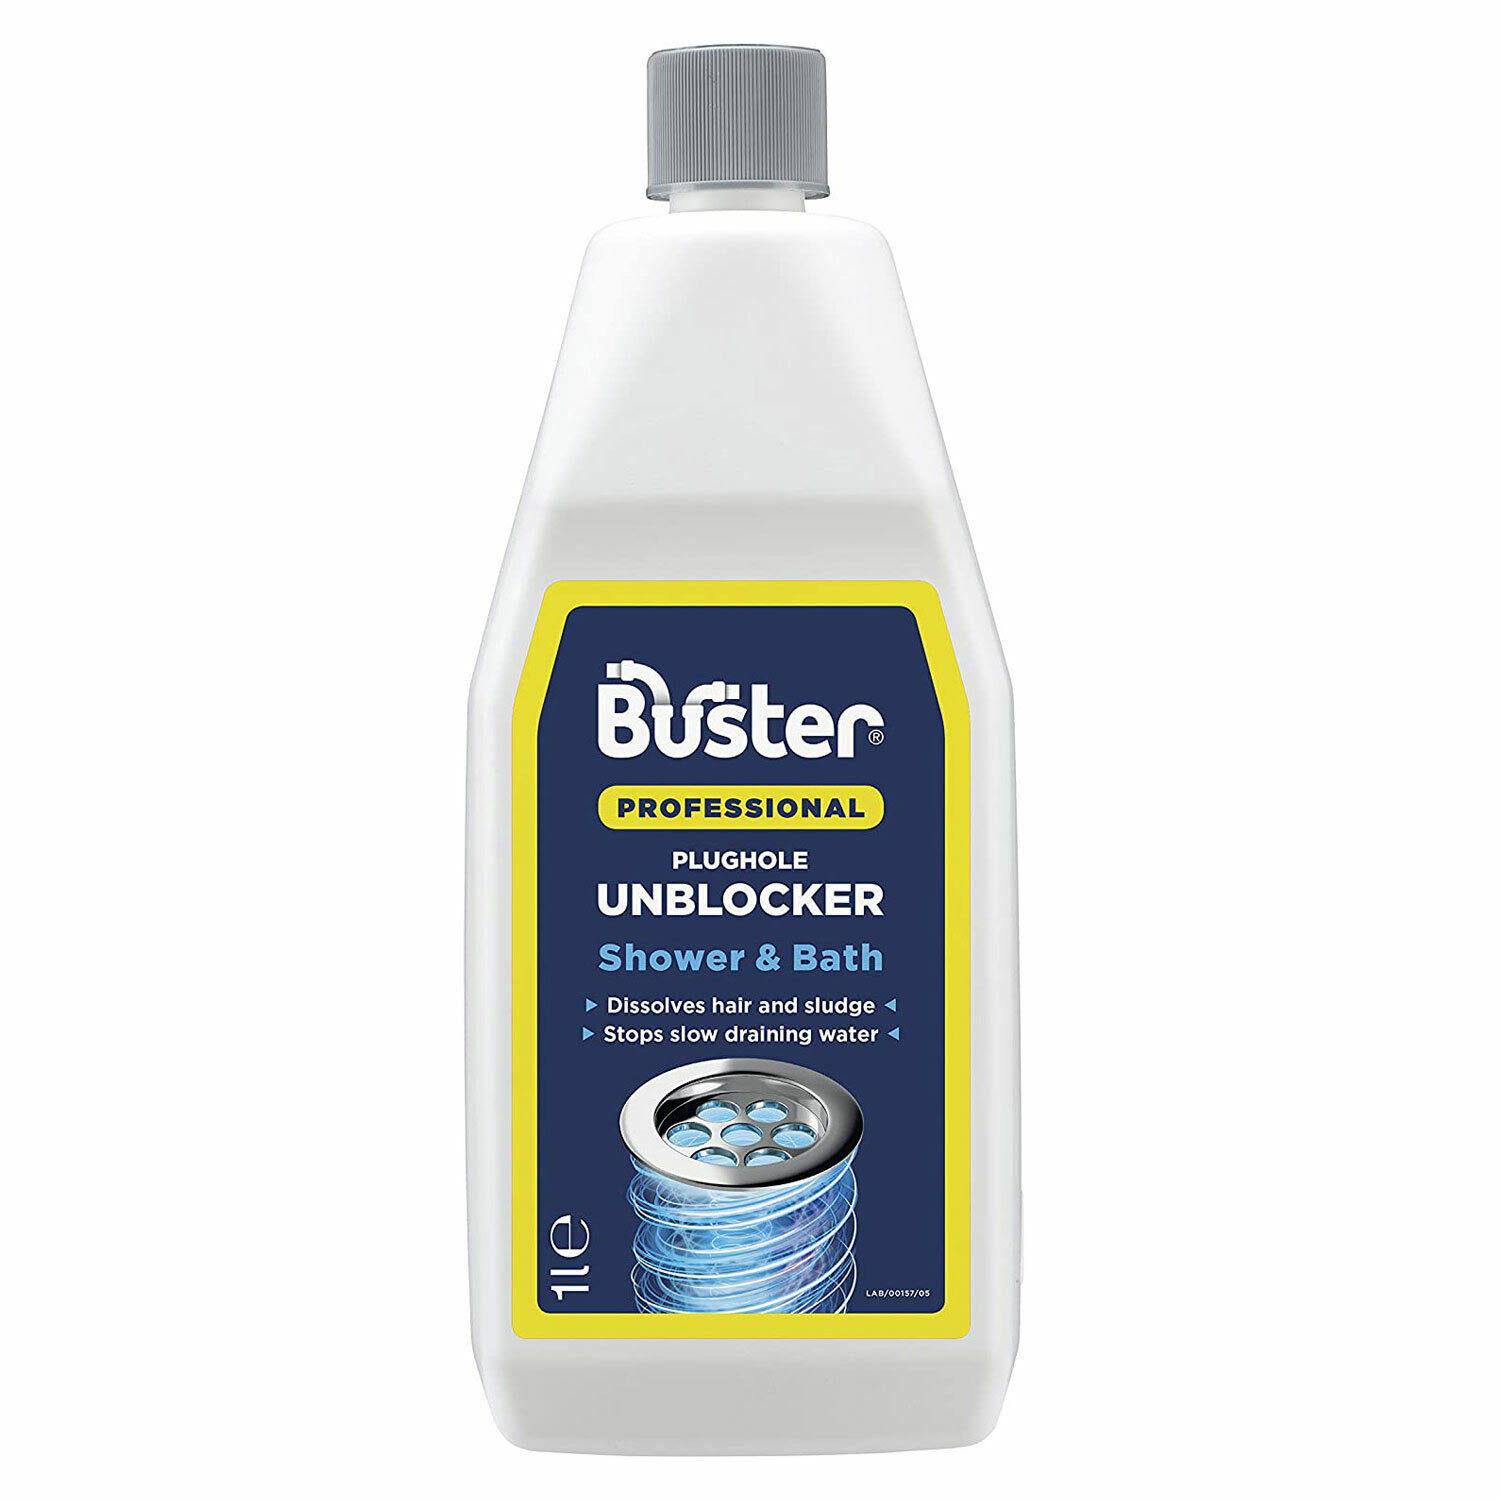 Buster Professional Shower and Bath Plughole Unblocker Drain Opener - 1 Liter